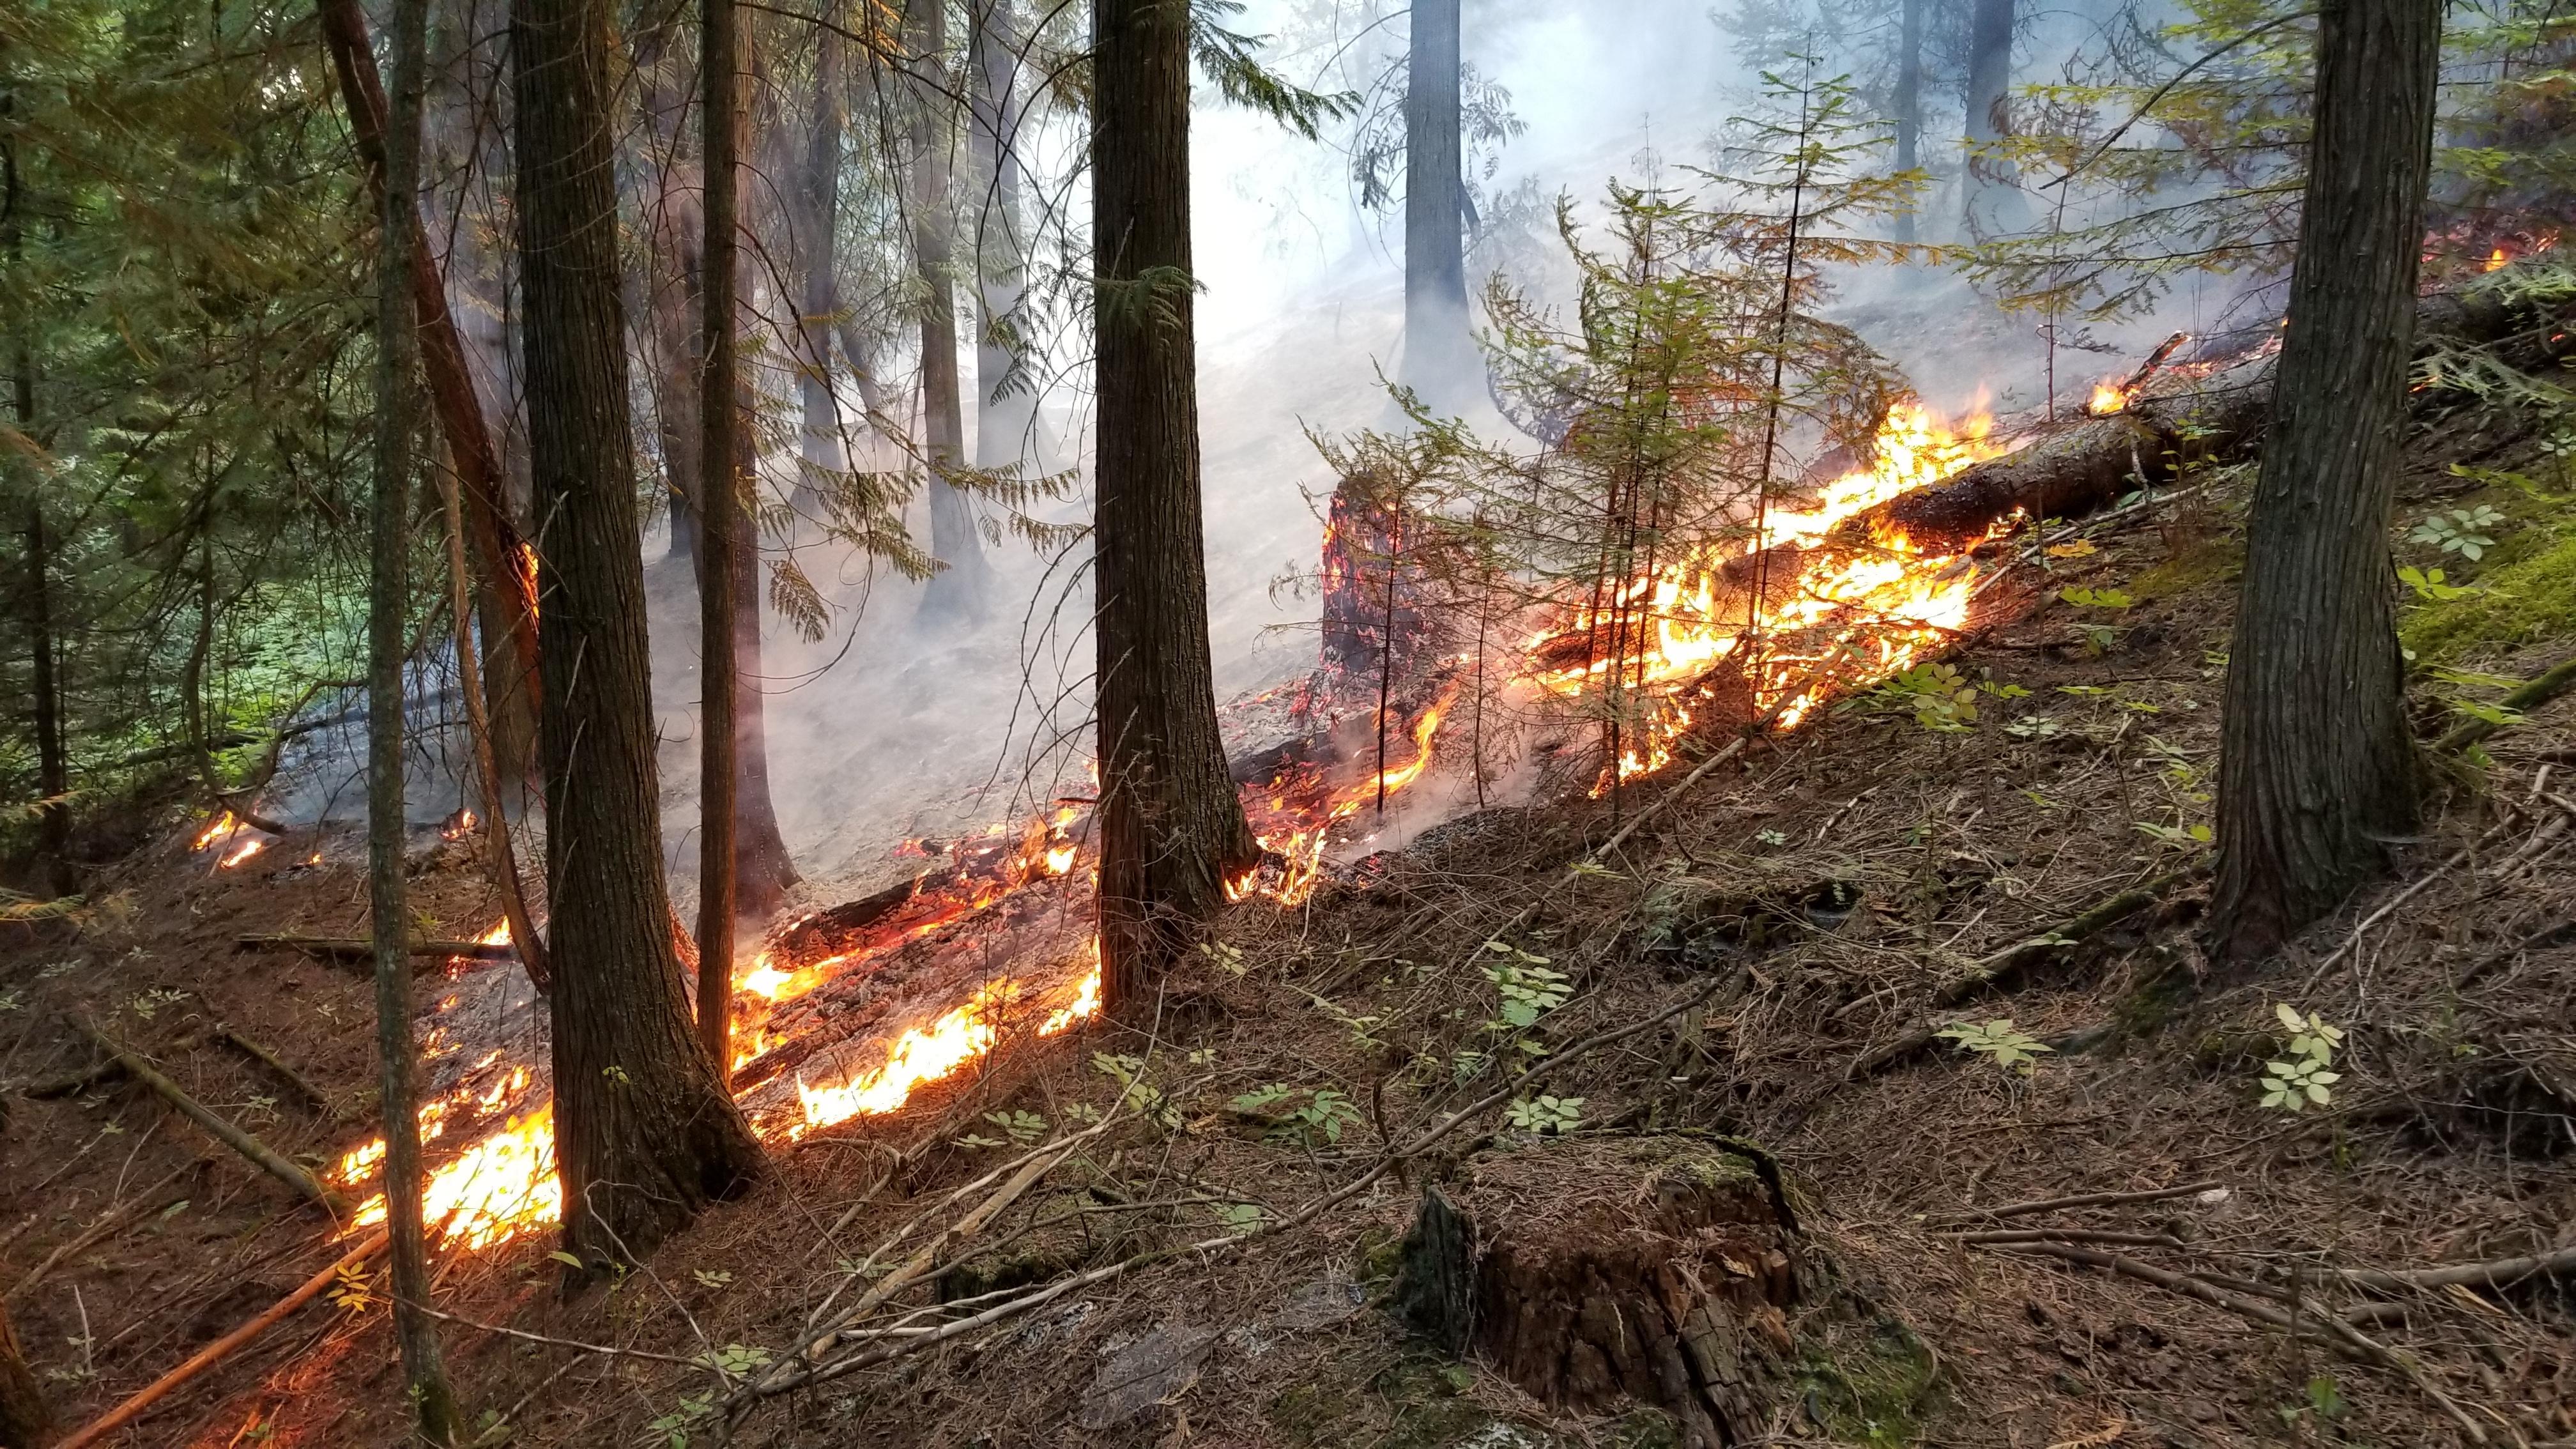 Backing fire in Ball Creek area on Sept. 9. Backing fire is a lower intensity surface fire that burns through forest vegetation litter and understory brush. This fire is creeping and smoldering and moving slowly downhill, exactly what firefighters want.